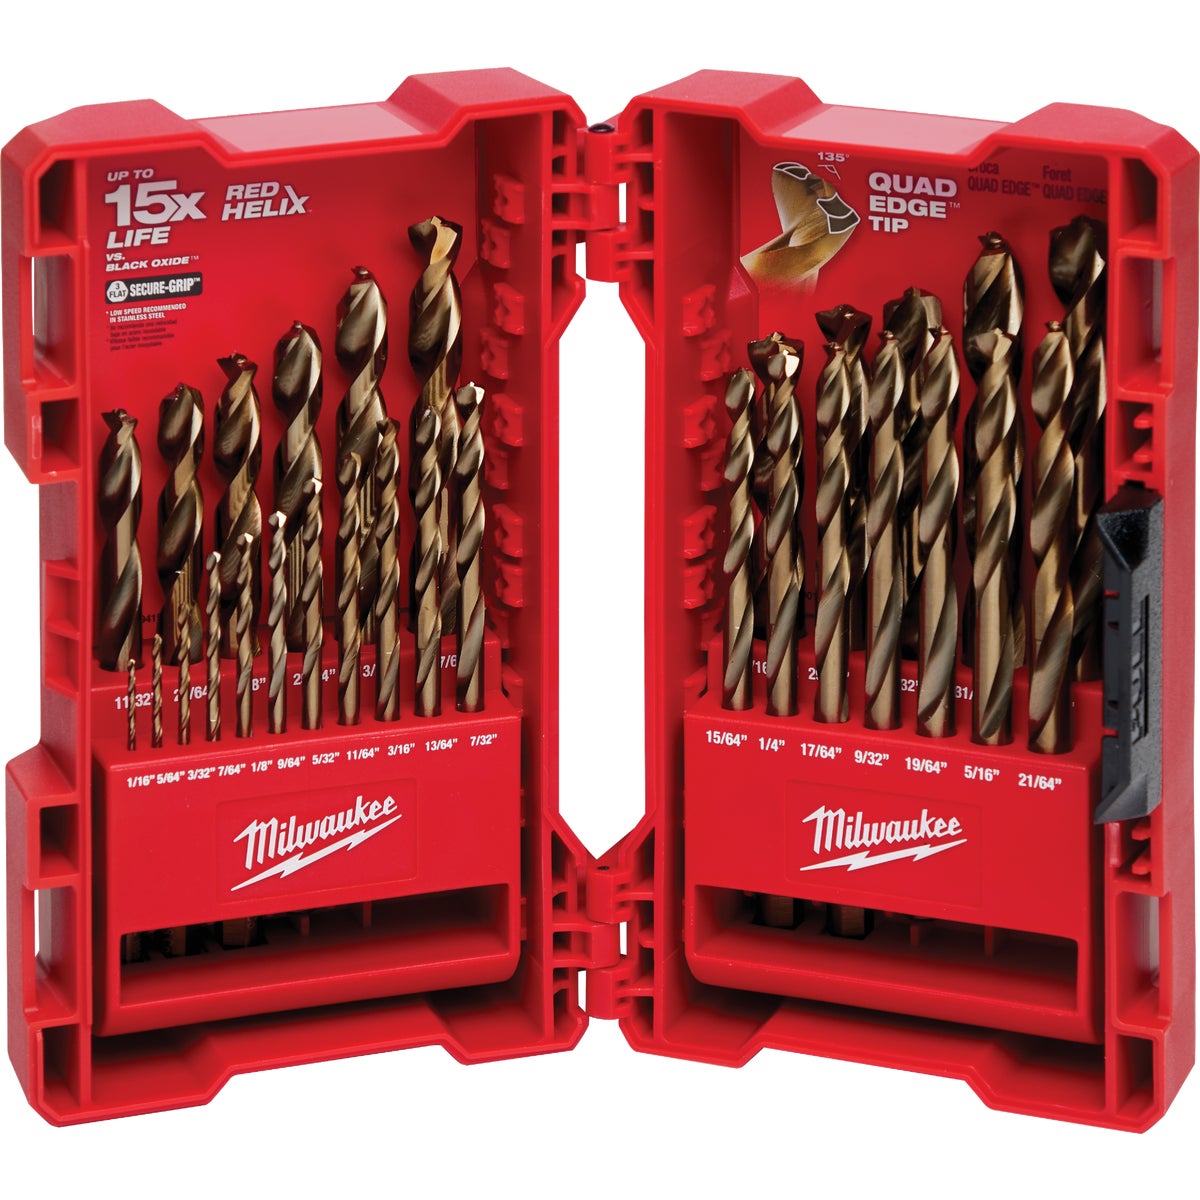 Item 393316, The Milwaukee Red Helix 29-Piece Cobalt Drill Bit Set is engineered for 